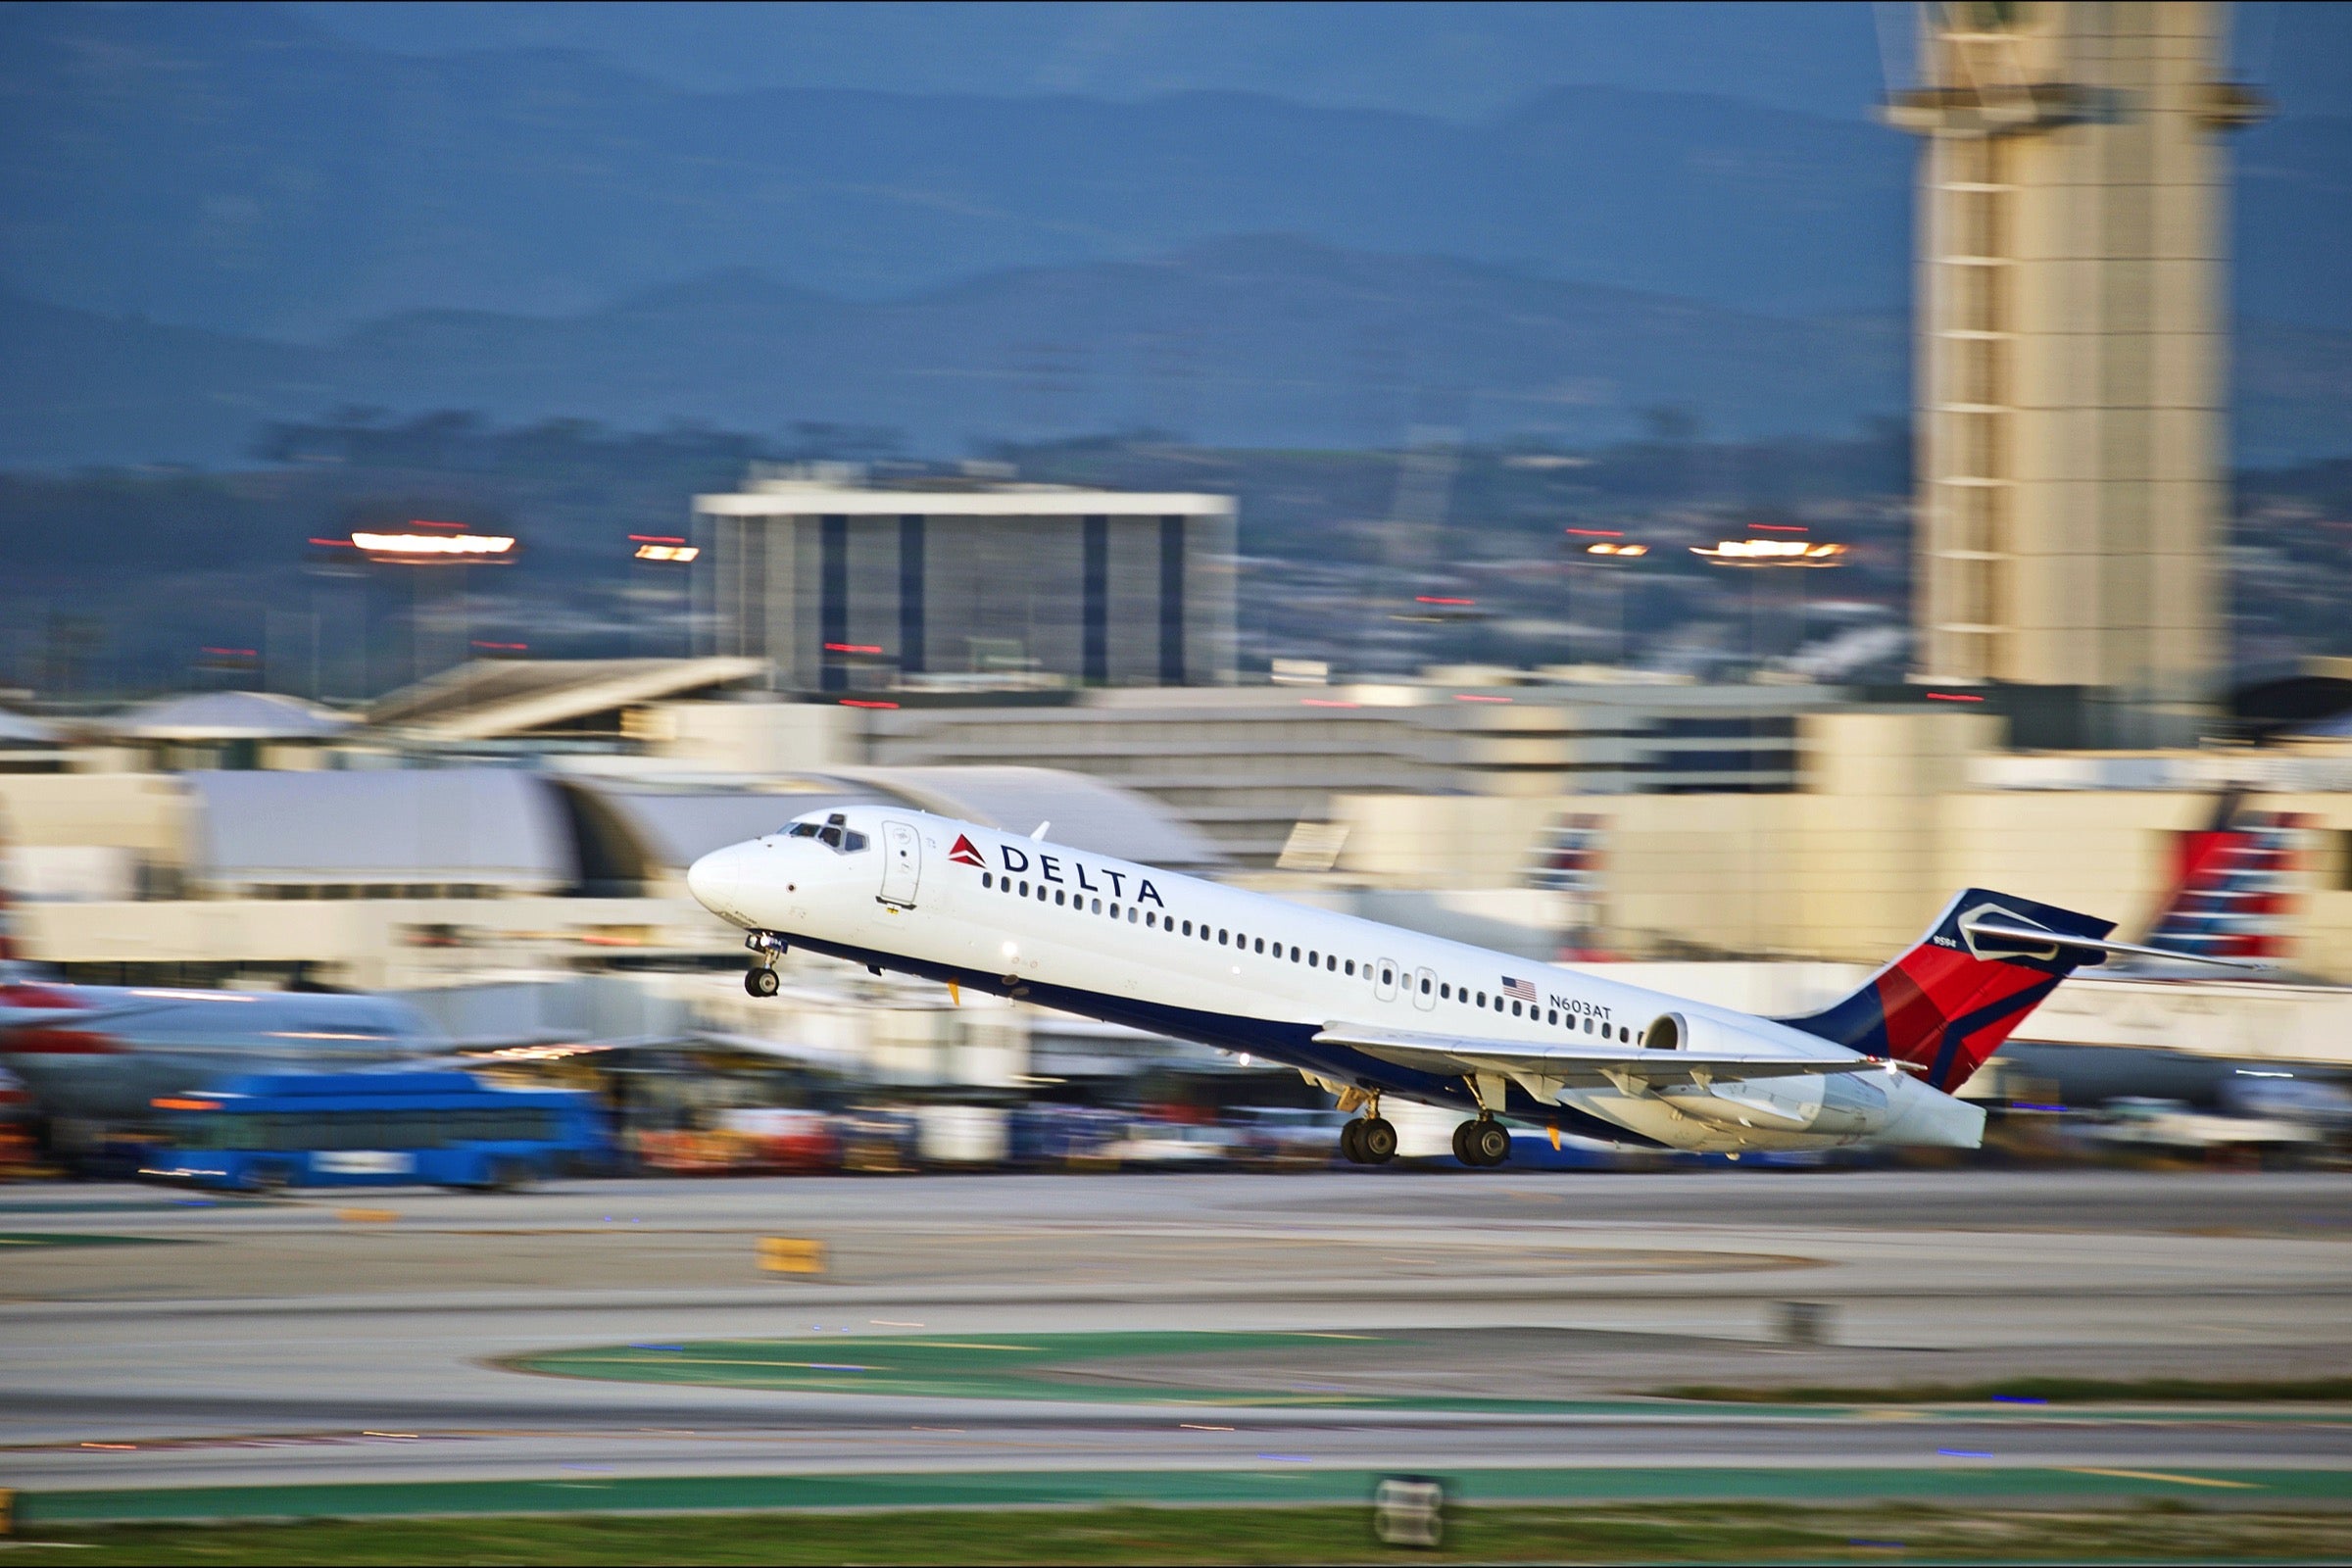 Delta 717 taking off at LAX airport